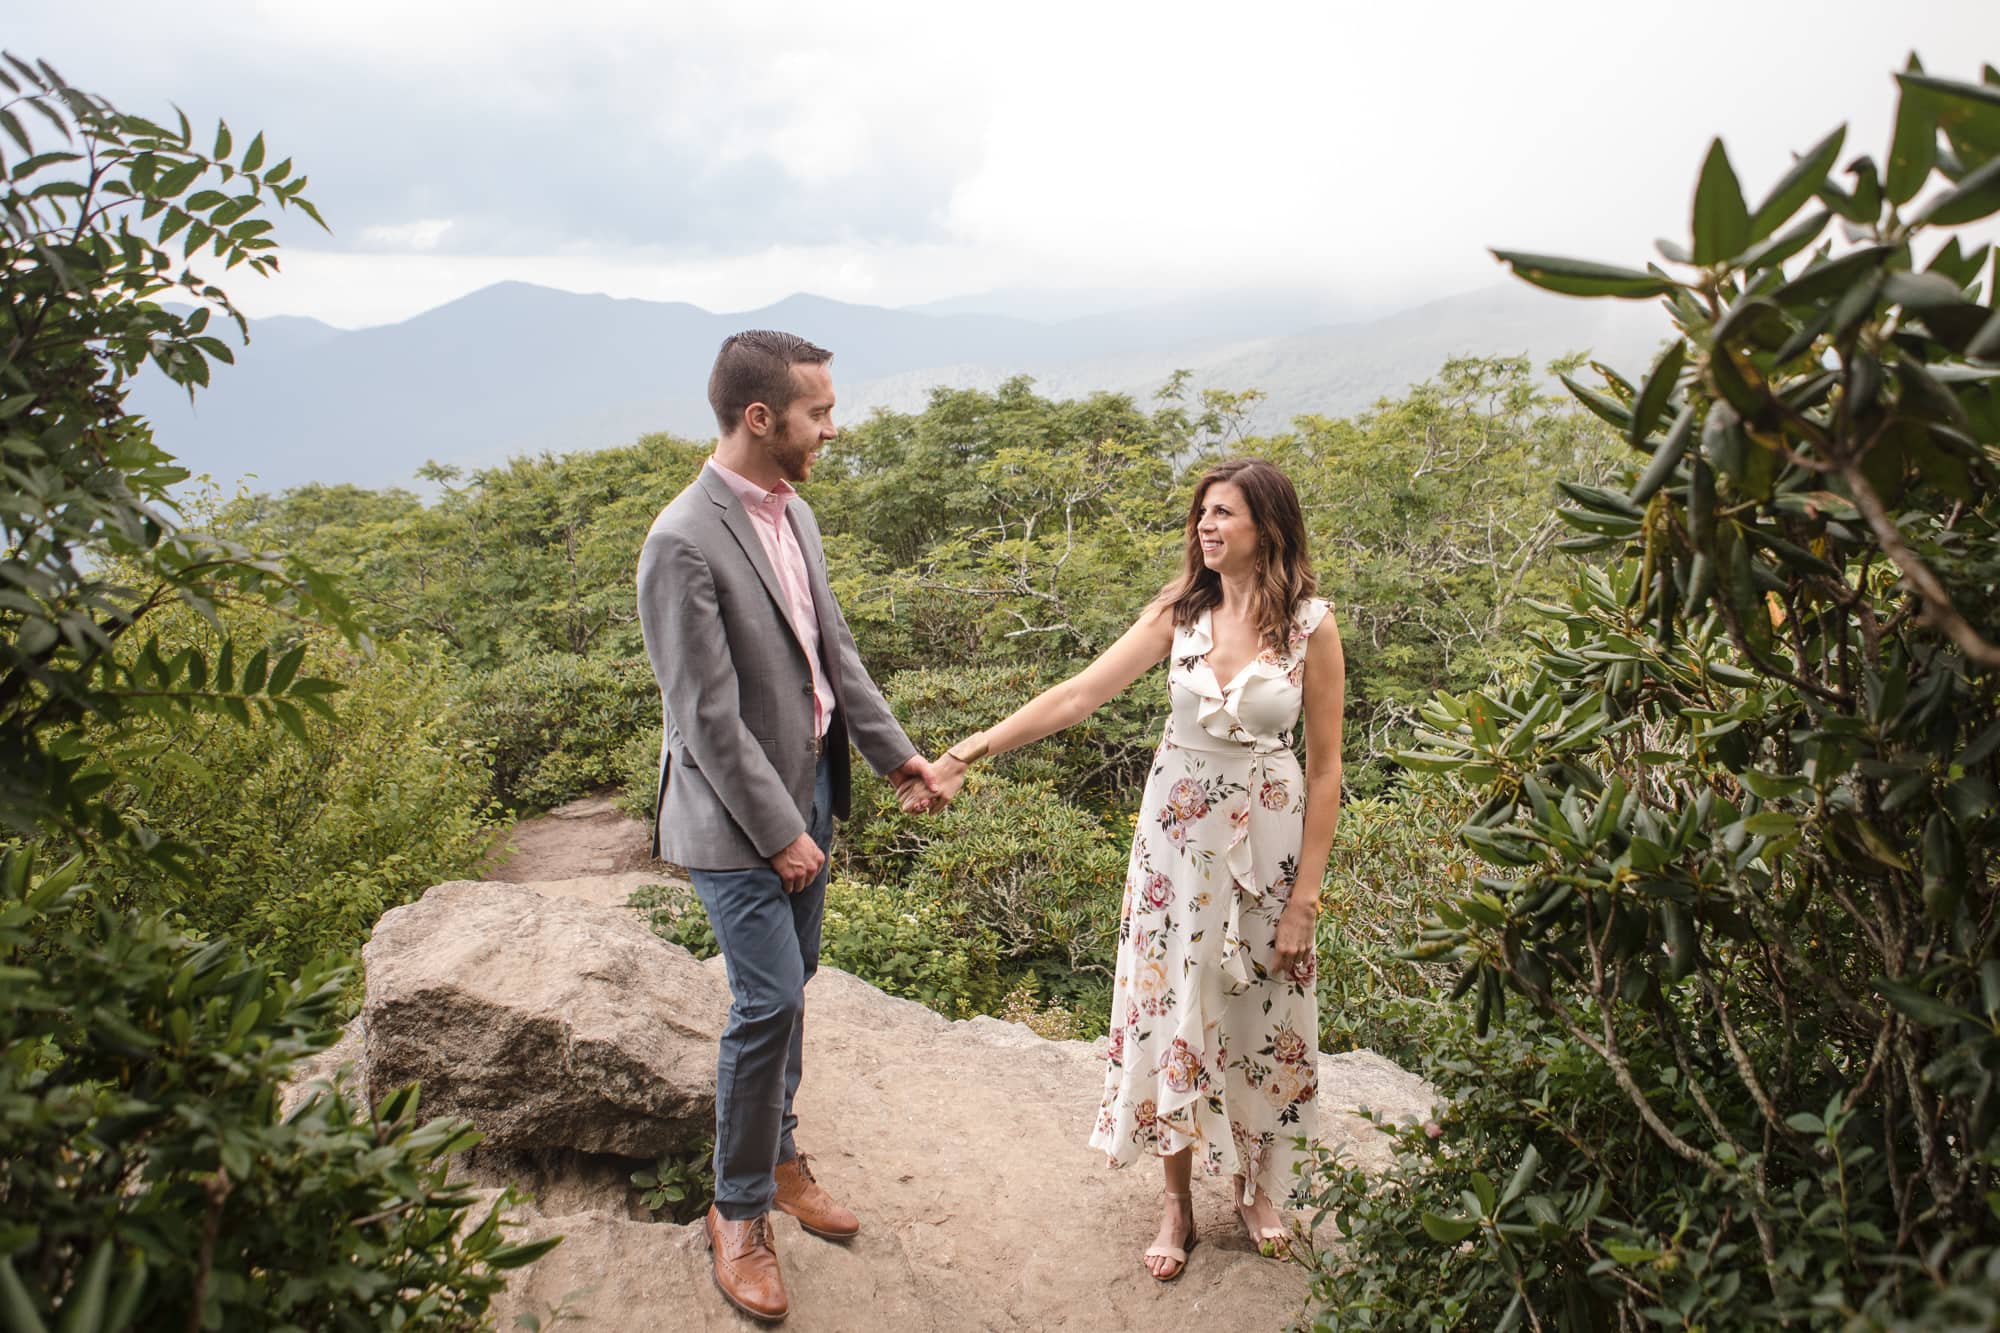 Couple holding hands on rock with mountain backdrop near Asheville North Carolina photography done by Kathy Beaver.